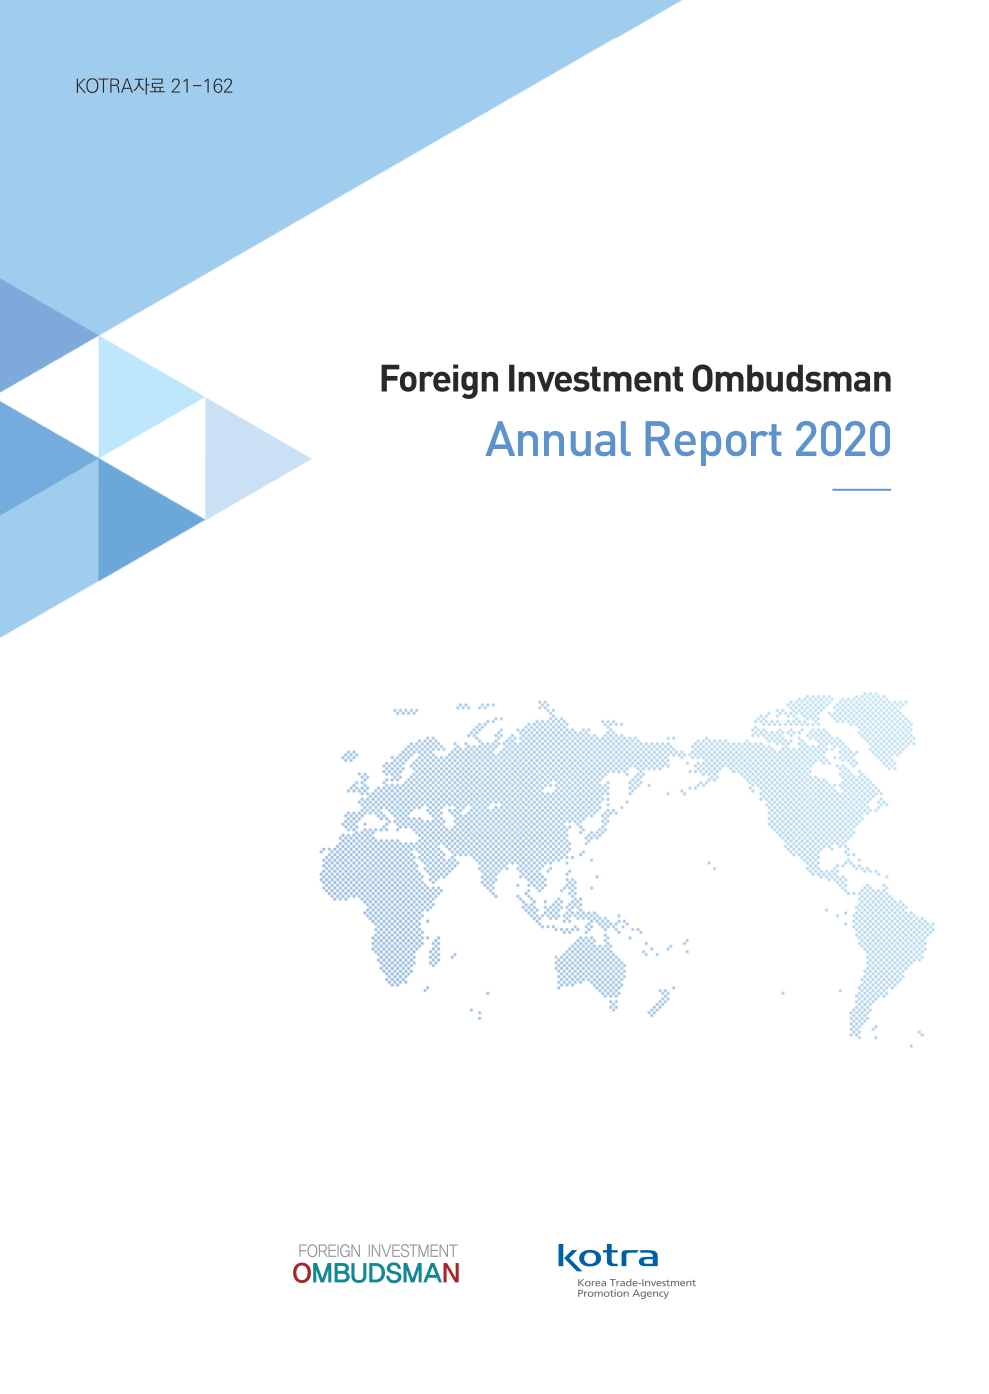 2020 Annual Report of Foreign Investment Ombudsman 